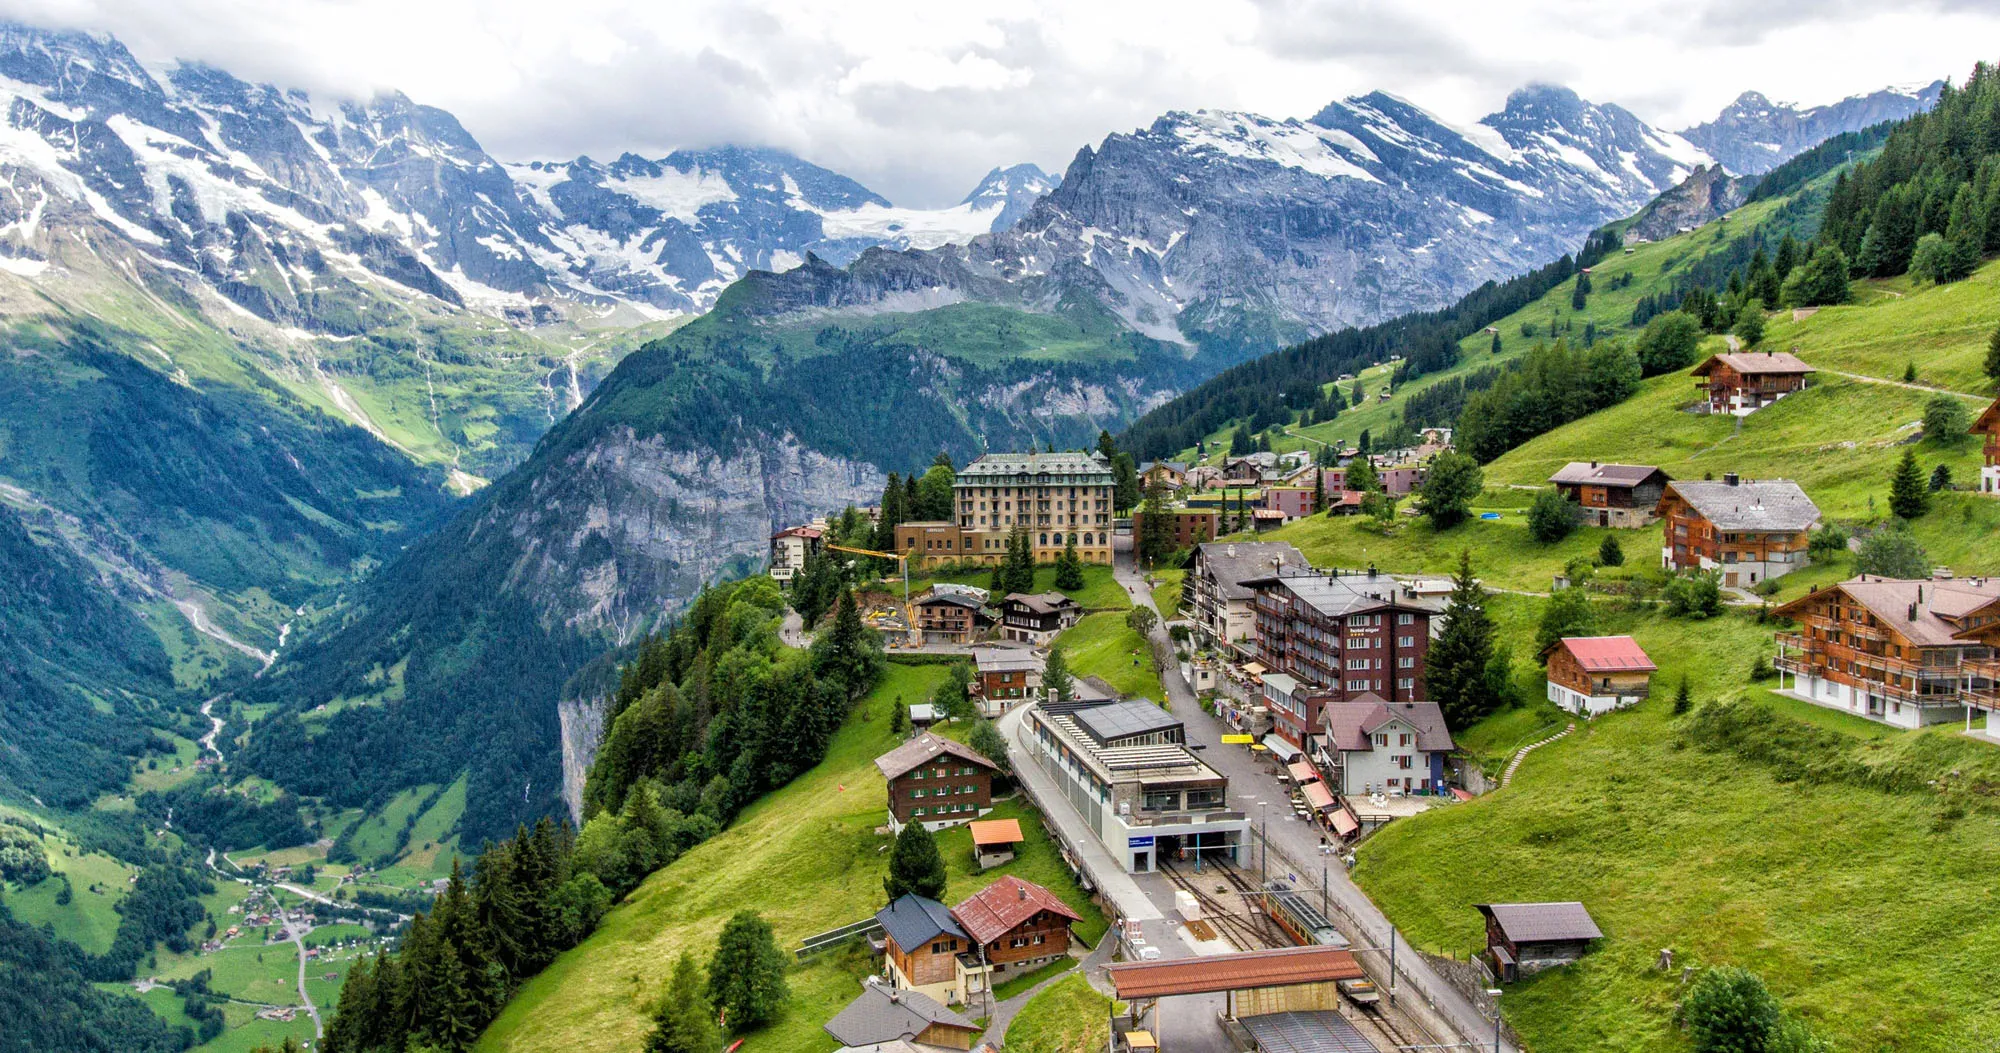 Featured image for “Where to Stay in Jungfrau, Switzerland: Best Towns & Hotels”